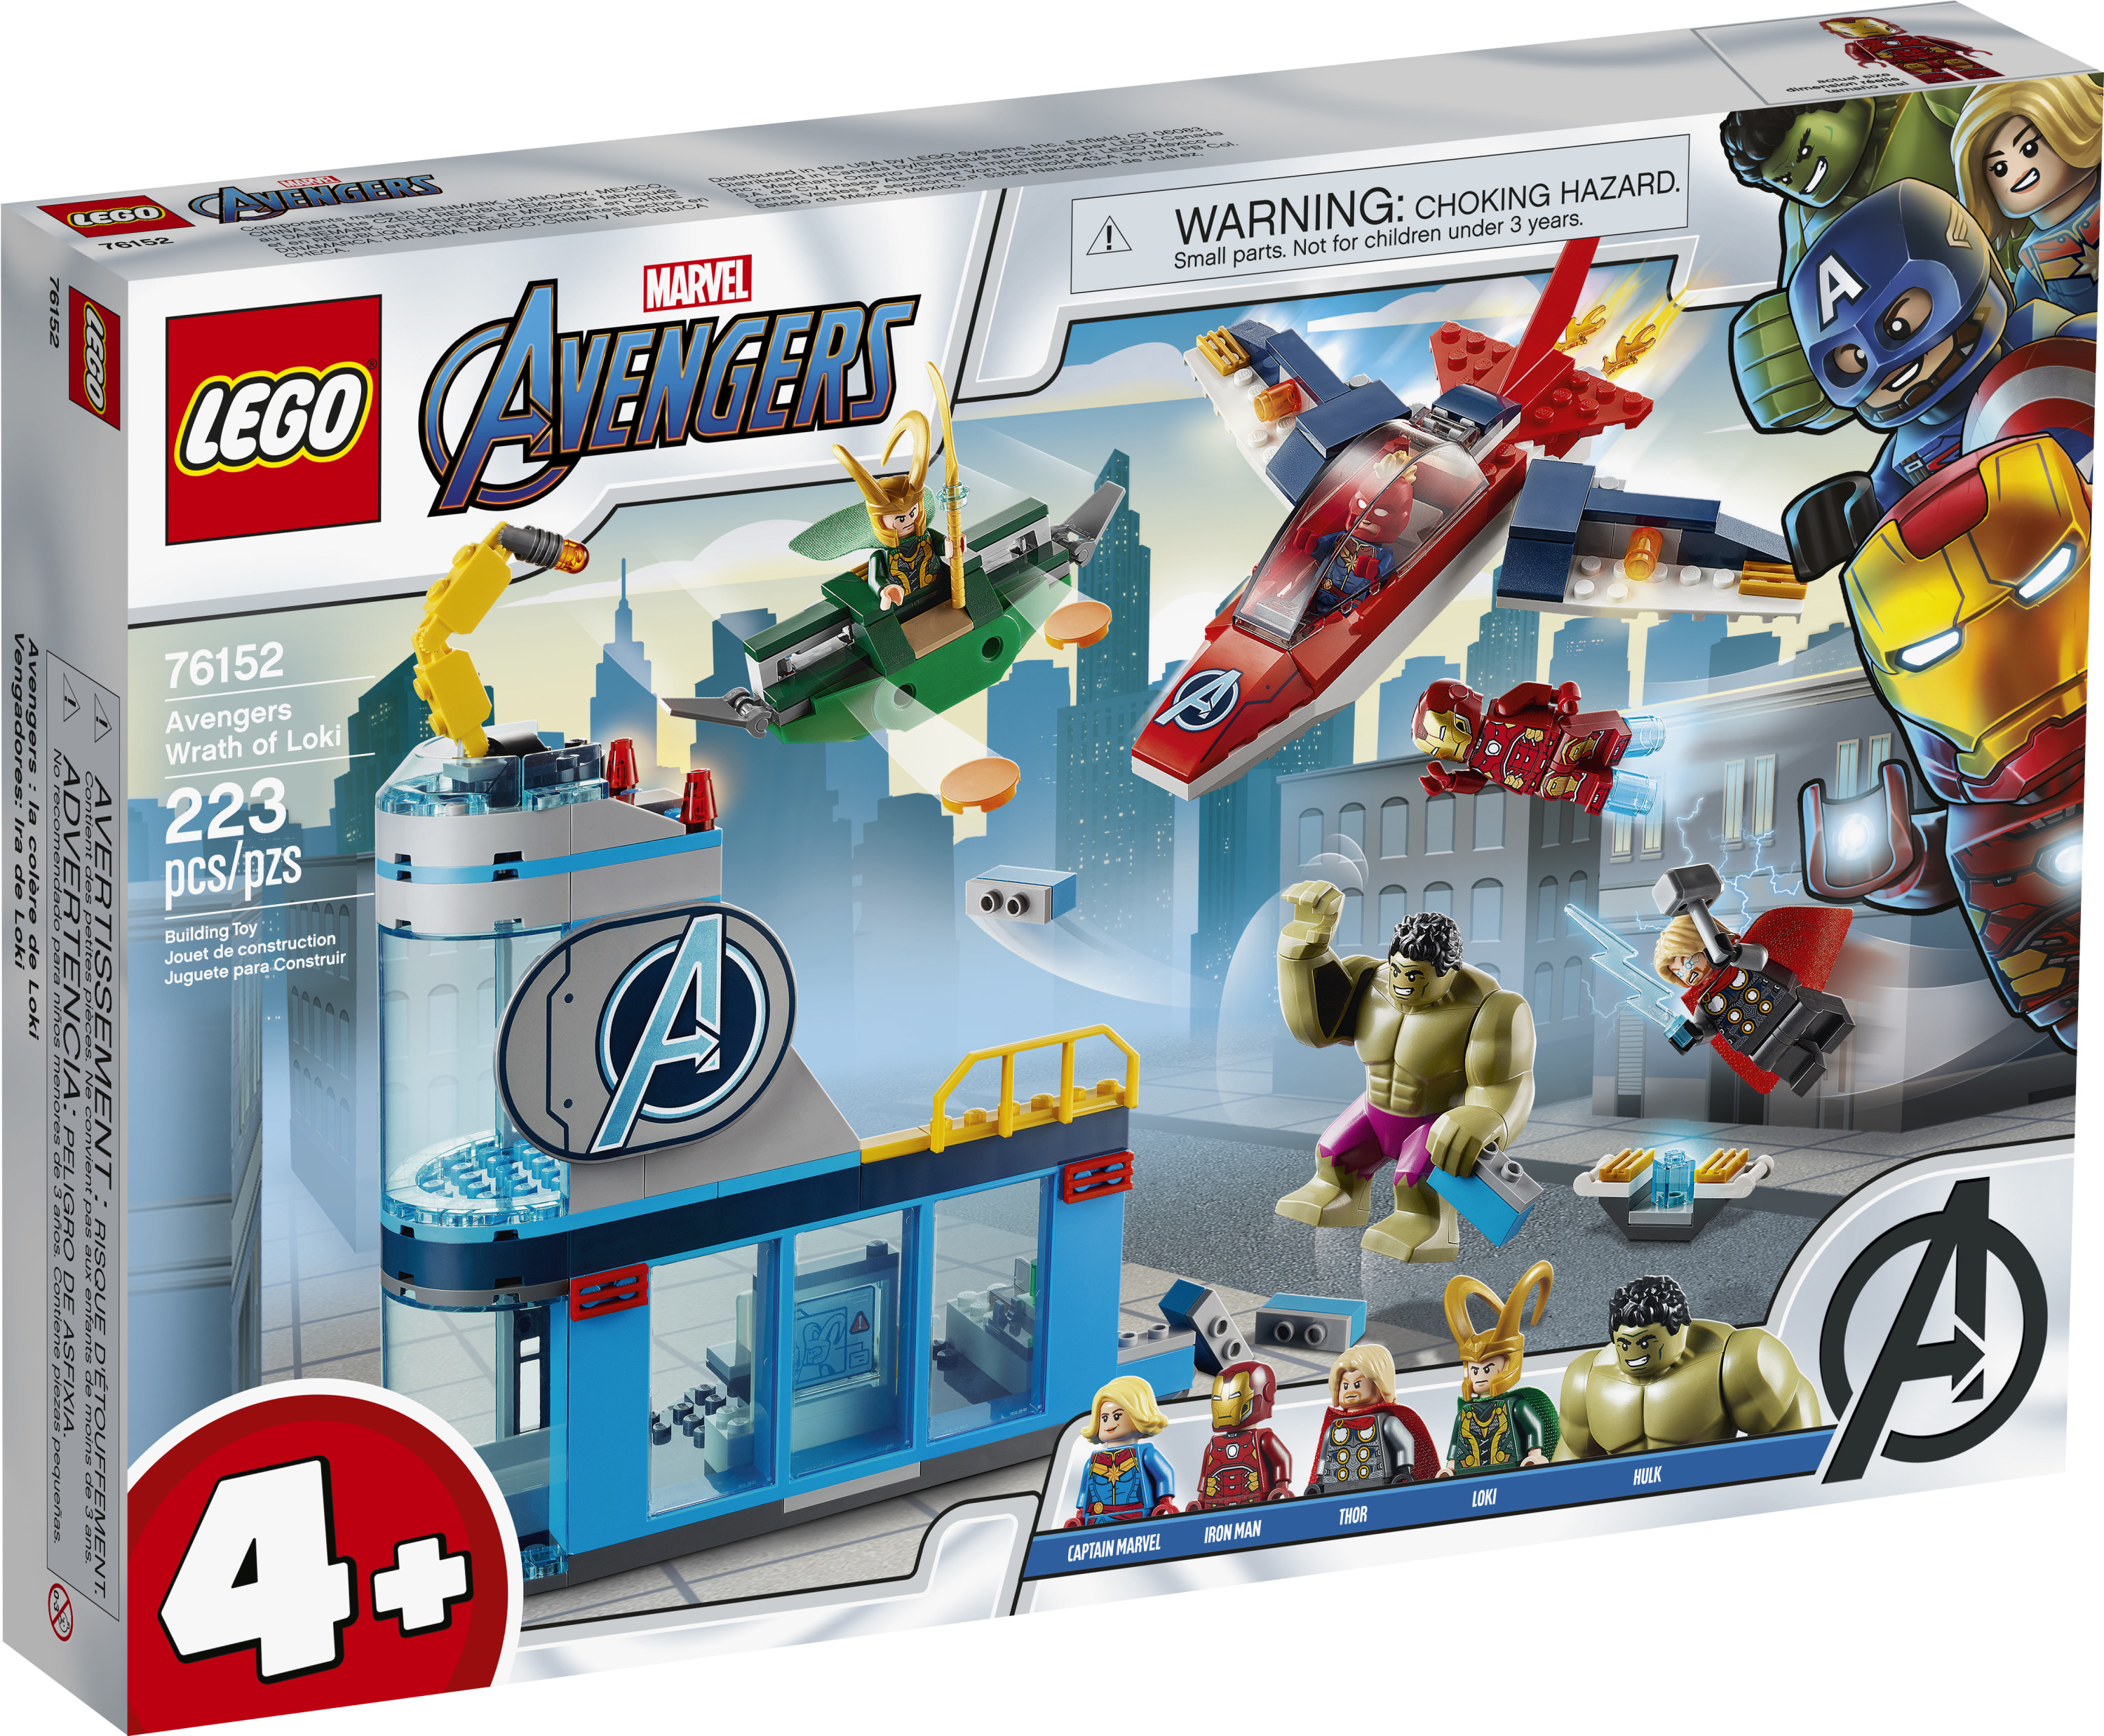 LEGO Marvel Avengers Wrath of Loki 76152 Cool Building Toy with Marvel Avengers Minifigures (223 Pieces) - image 5 of 8